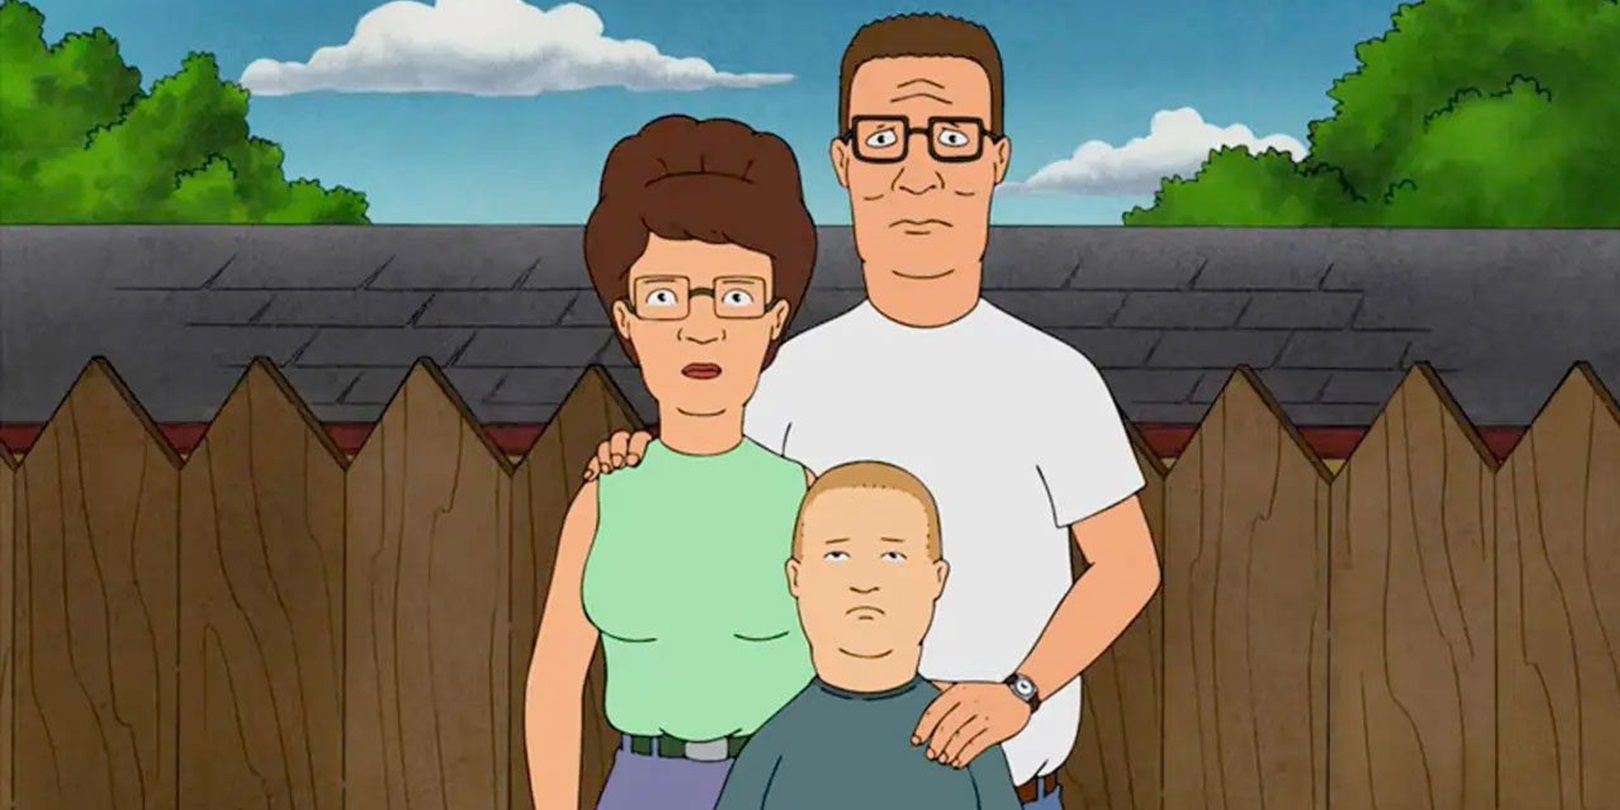 Hank Hill from King of the Hill